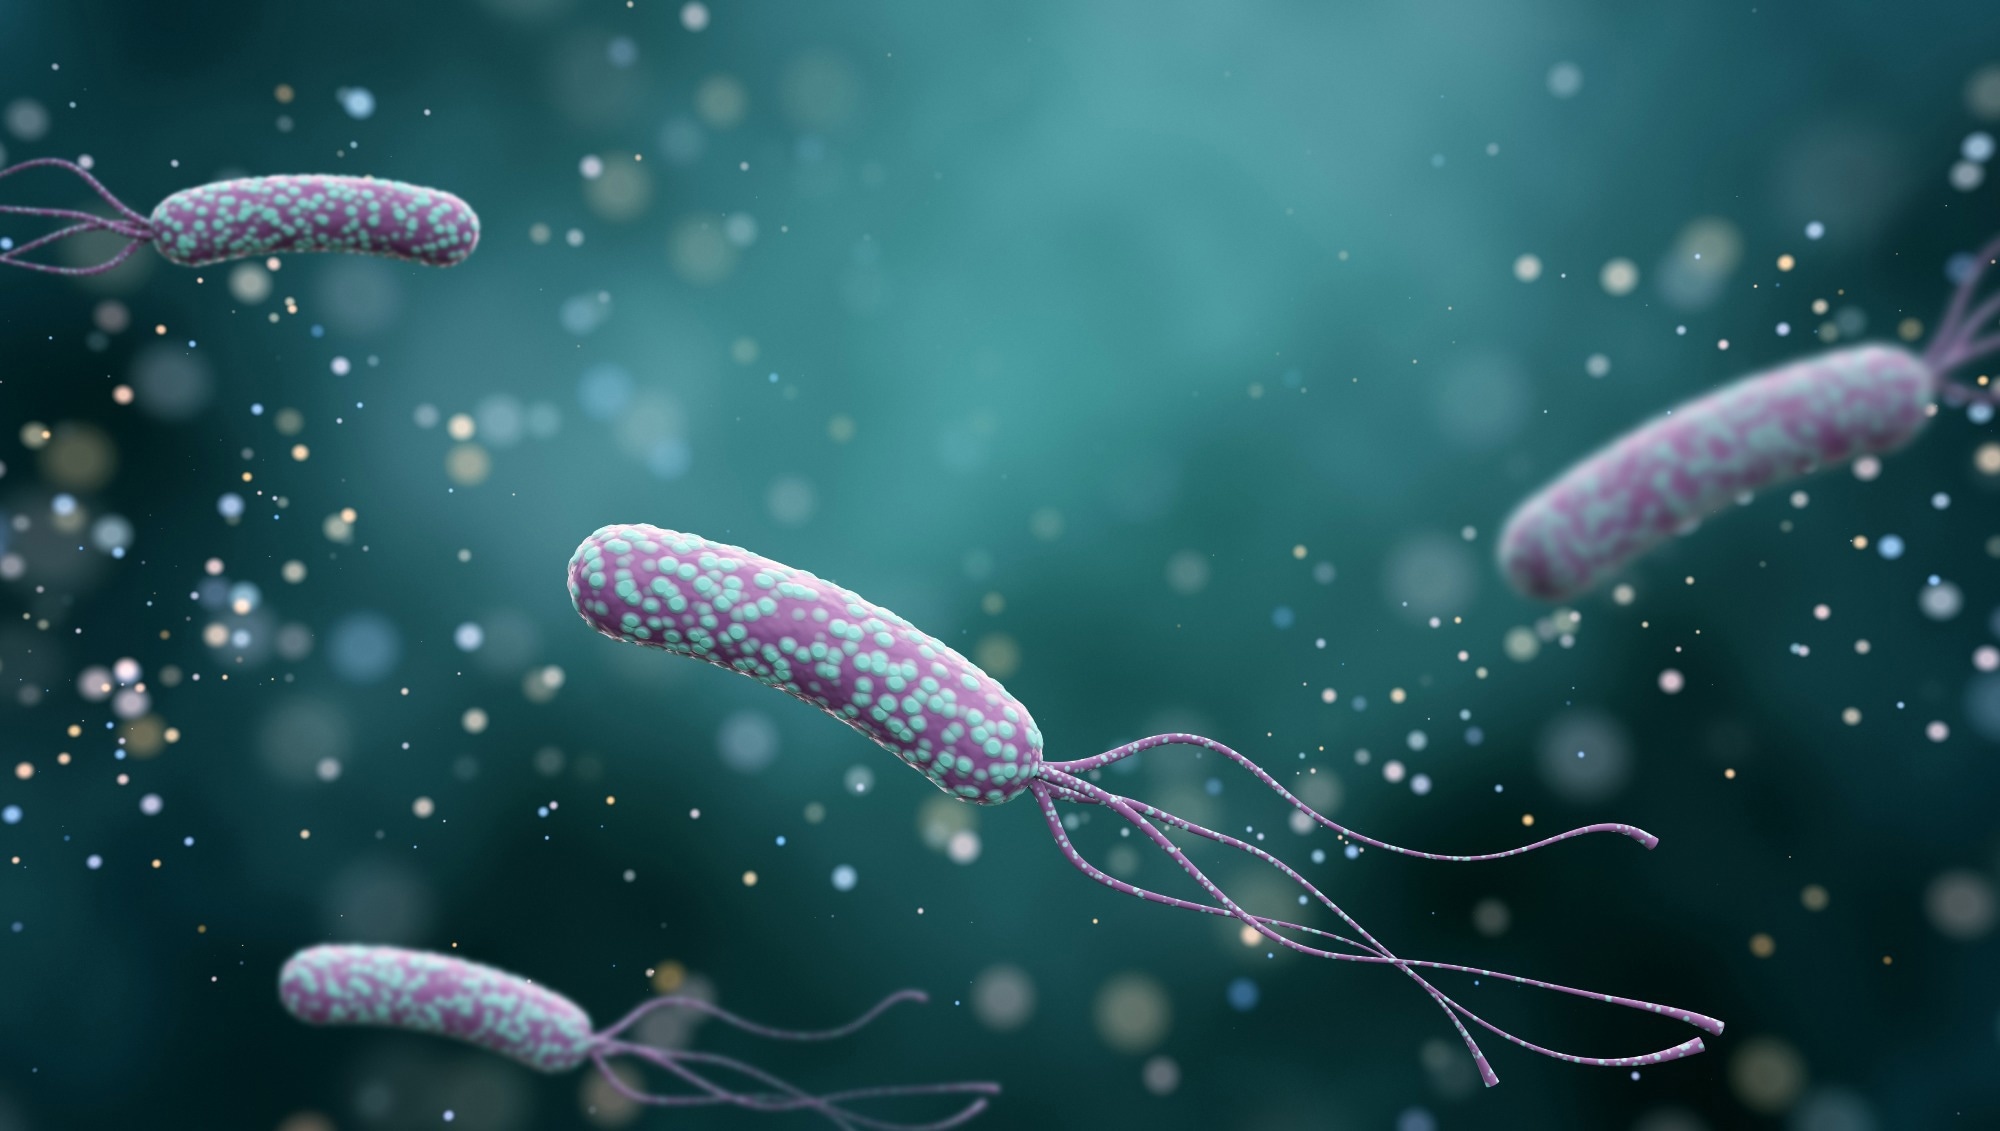 Study: The causal effect of Helicobacter pylori infection on coronary heart disease is mediated by the body mass index: a Mendelian randomization study. Image Credit: K_E_N/Shutterstock.com